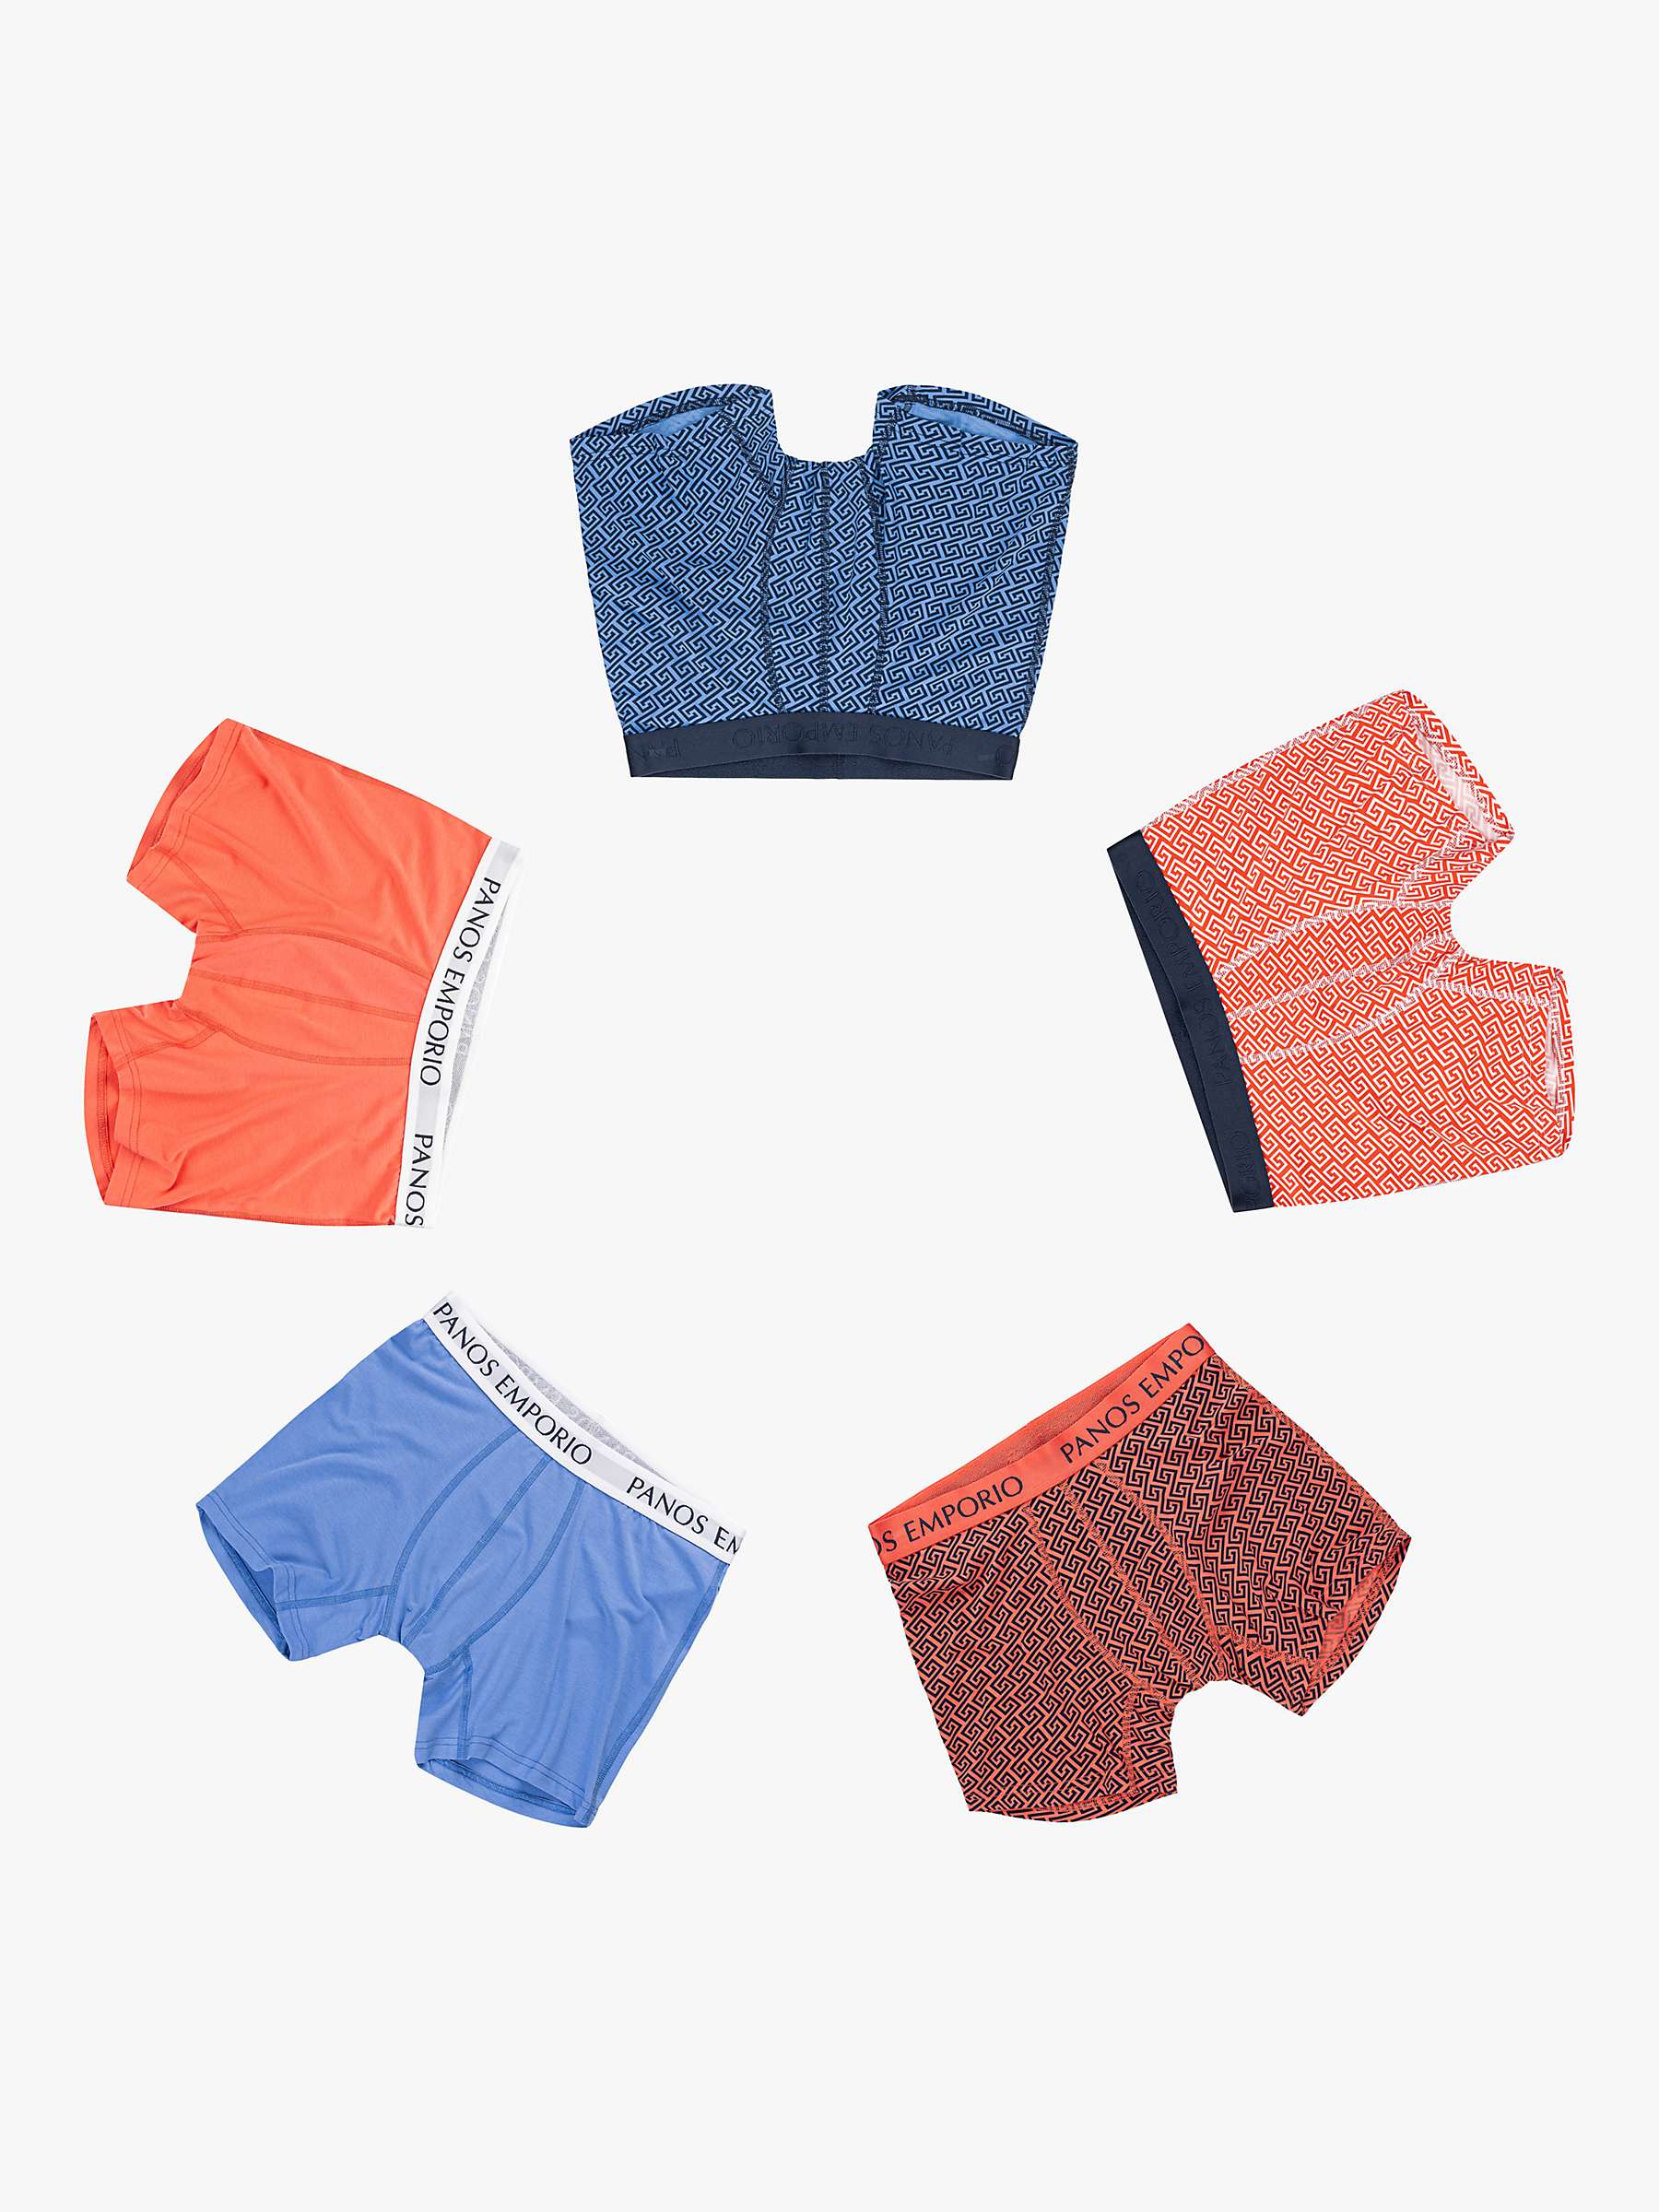 Buy Panos Emporio Eco Bamboo and Organic Cotton Blend Trunks, Pack of 5 Online at johnlewis.com